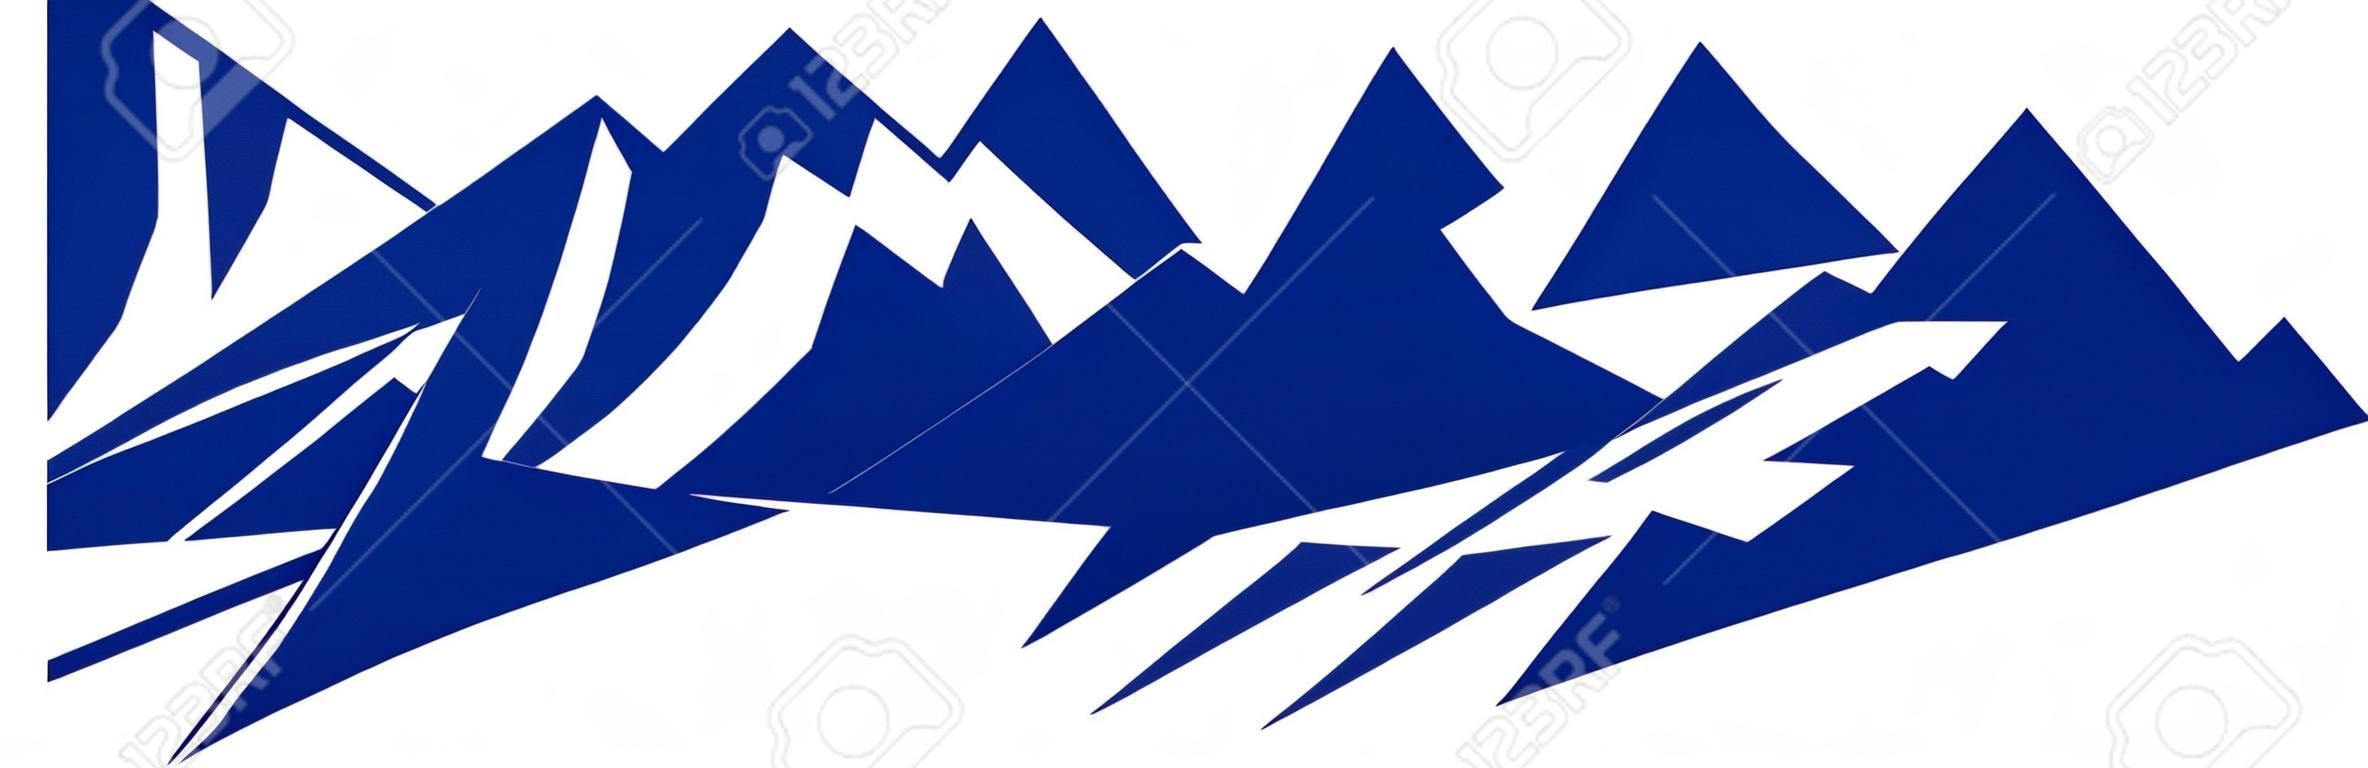 Silhouette blue mountain with three peaks on white background – vector